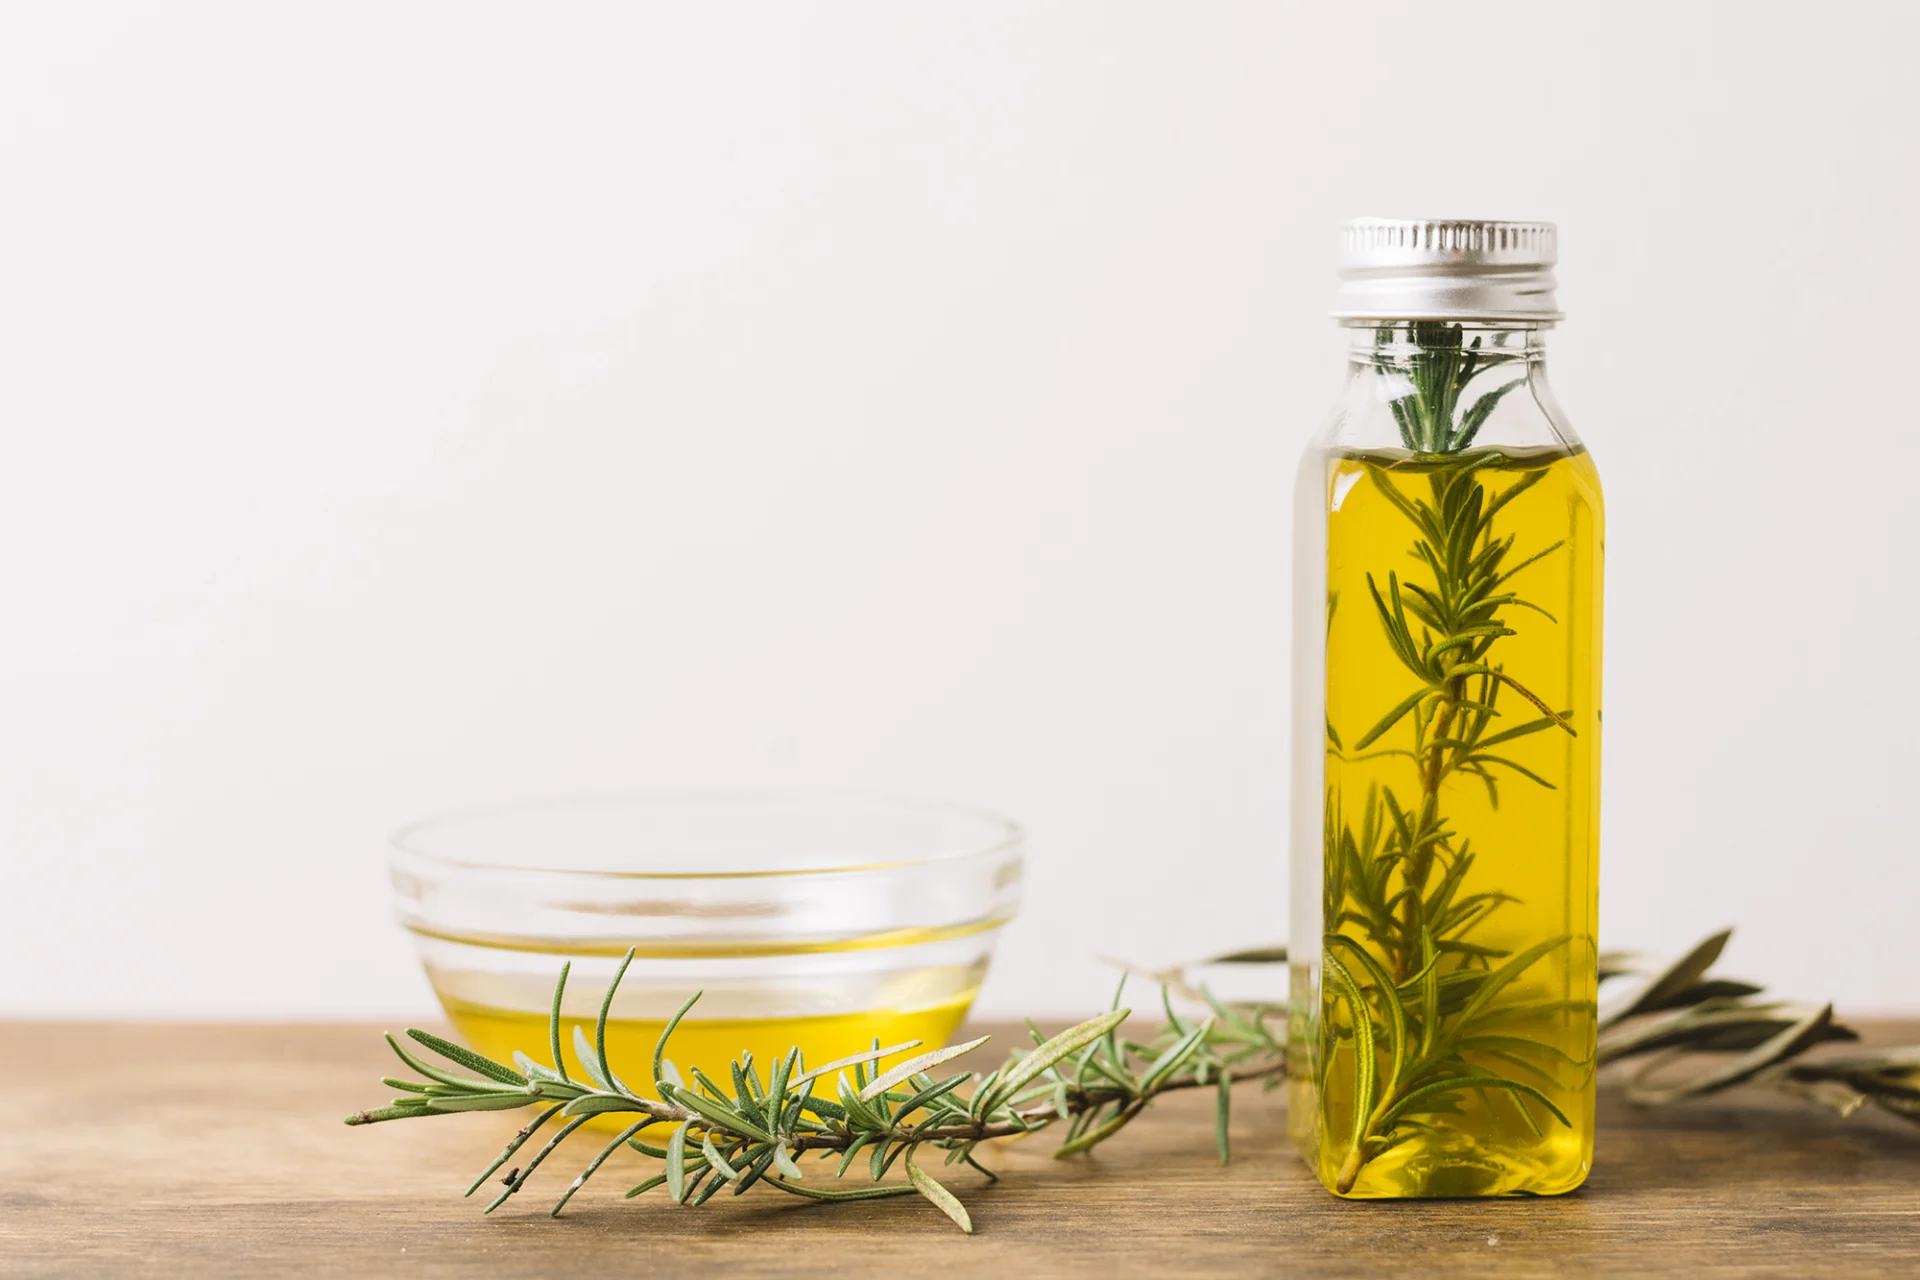 A small bowl of oil stands on the left-hand side on a wooden table. To the right, there is a small oil-filled bottle with a sprig of rosemary in it. 